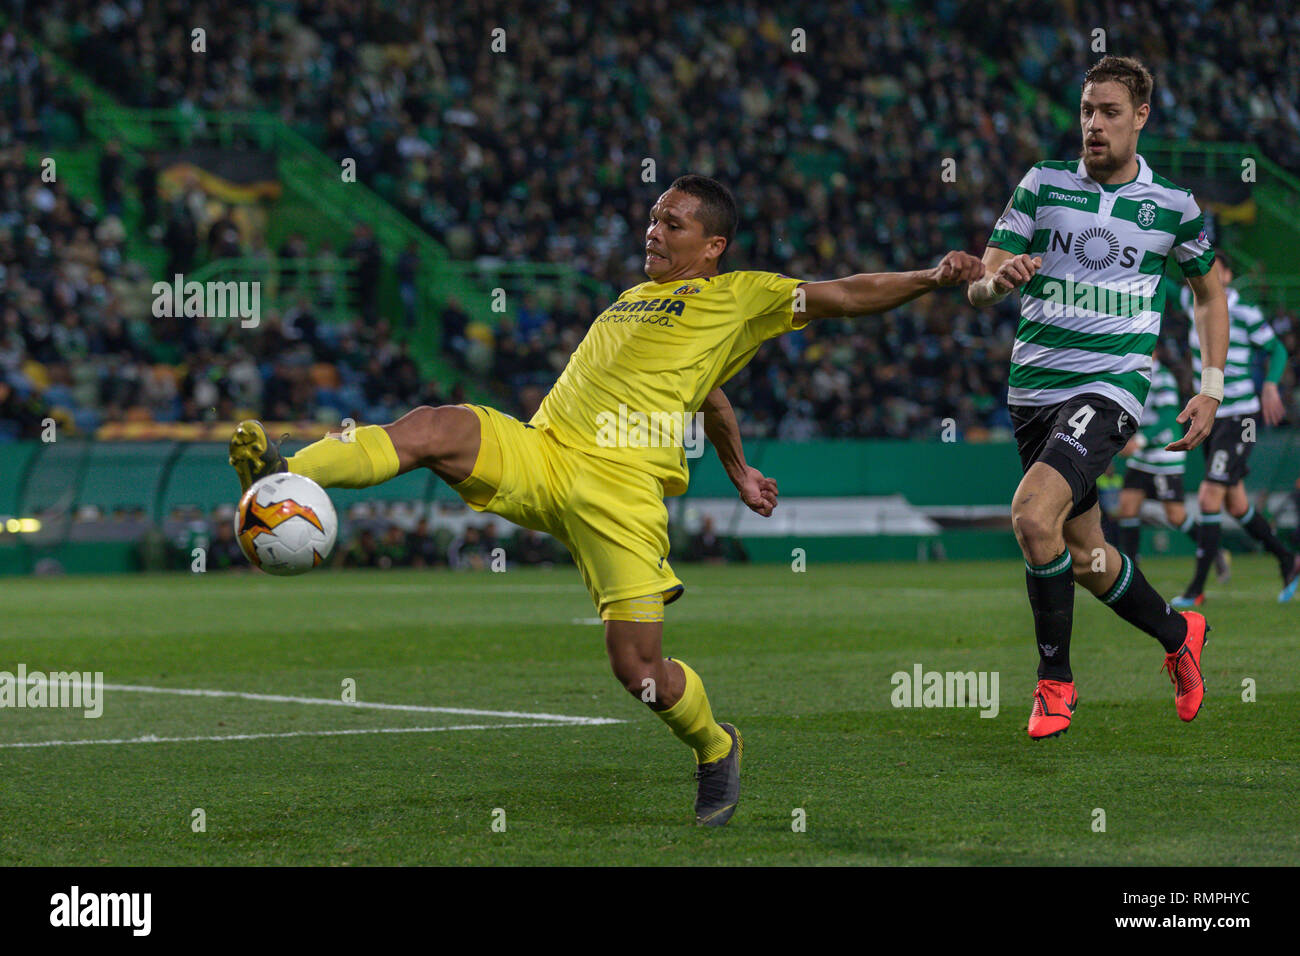 Lisbon, Portugal. 14th Feb, 2019. February 14, 2019. Lisbon, Portugal. Villarreal's forward from Colombia Carlos Bacca (9) in action during the game of the UEFA Europa League, Round of 32, Sporting CP vs Villarreal CF © Alexandre de Sousa/Alamy Live News Credit: Alexandre Sousa/Alamy Live News Stock Photo